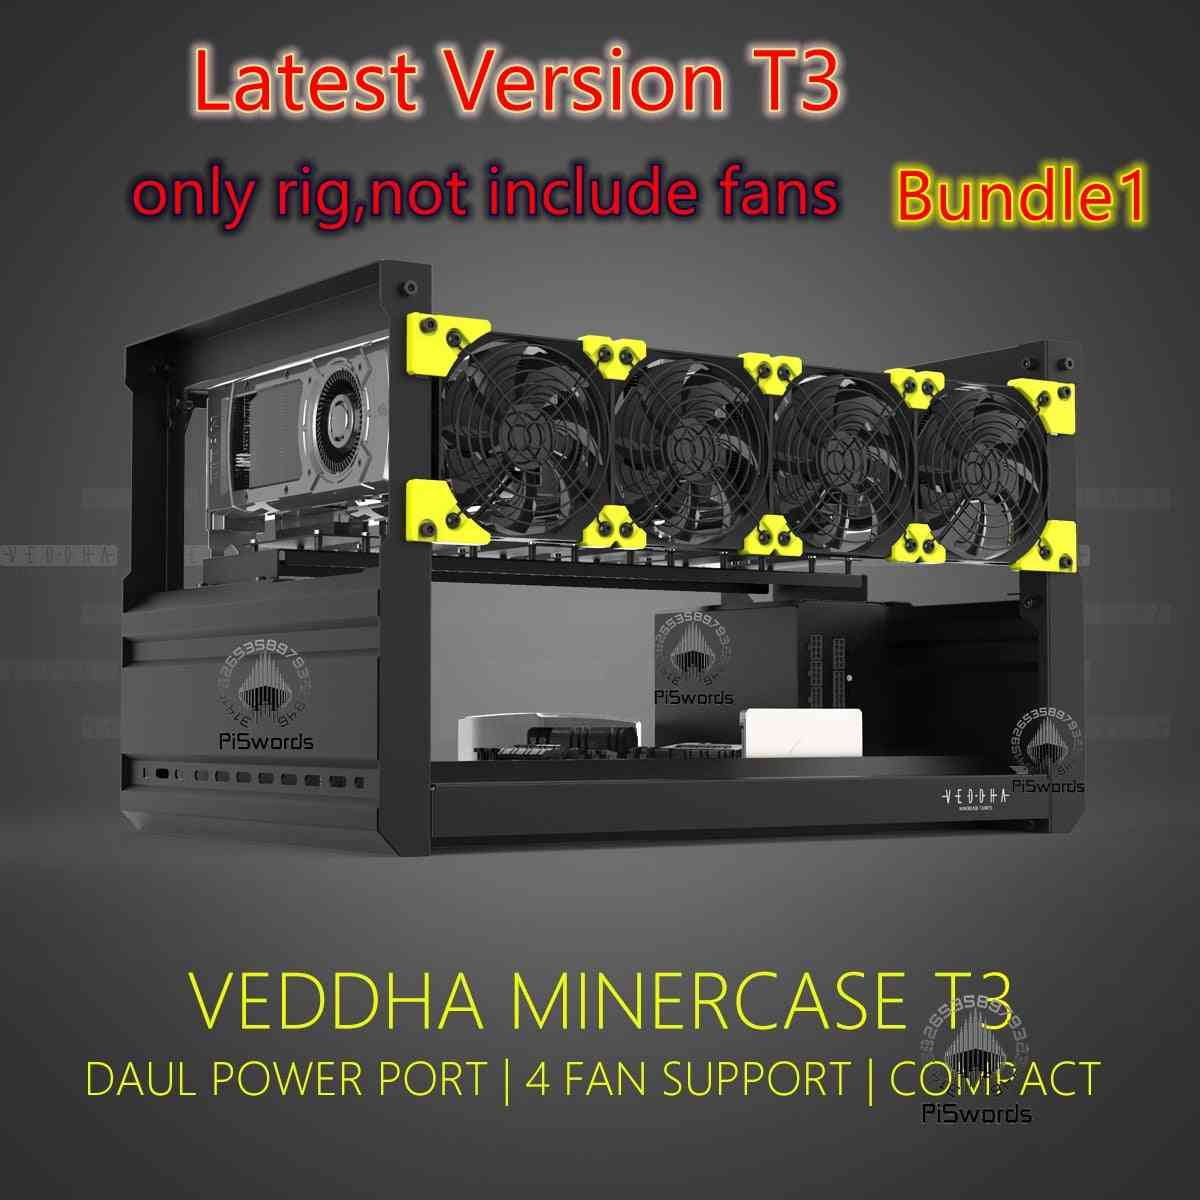 Veddha 6 Gpu T3 Miner Mining Rig Aluminum Open Air Case Computer Eth Frame Rig For Bitcoin Miner Kit